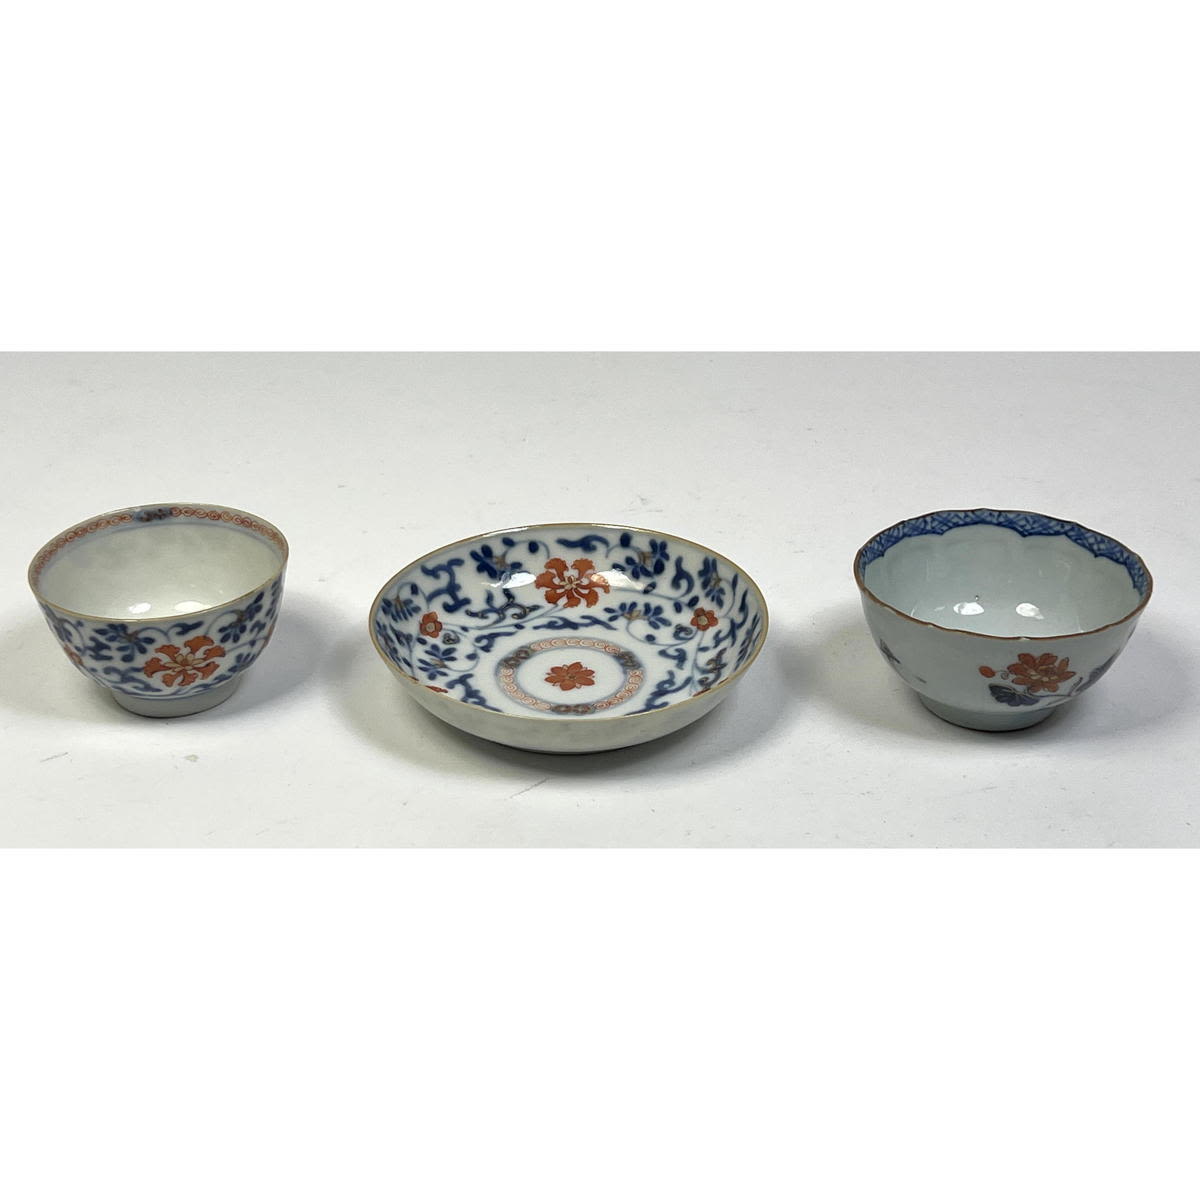 3pc Porcelain Cups and Saucer. Glazed